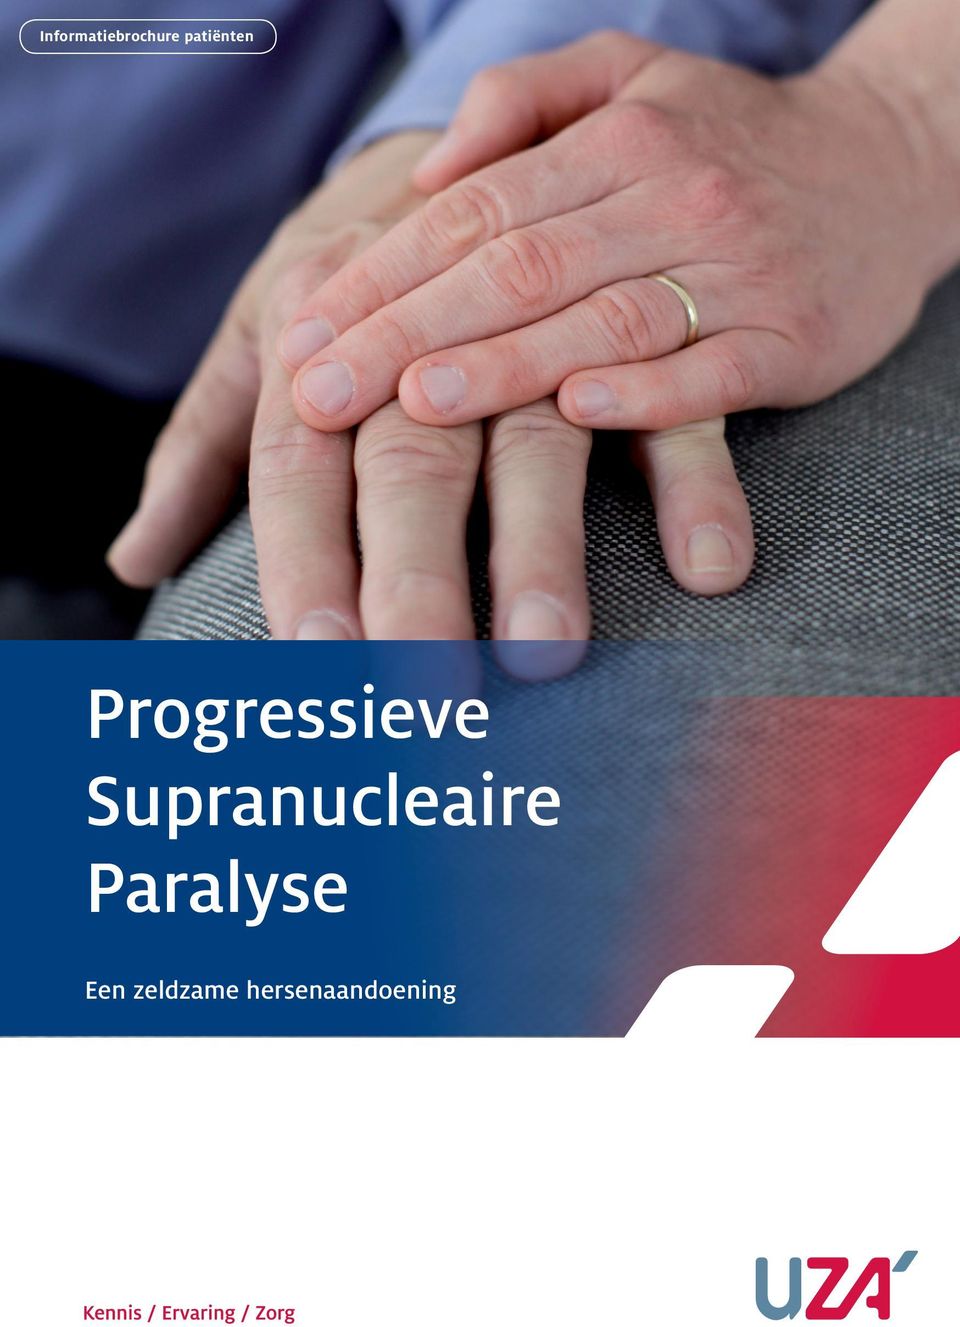 Supranucleaire Paralyse